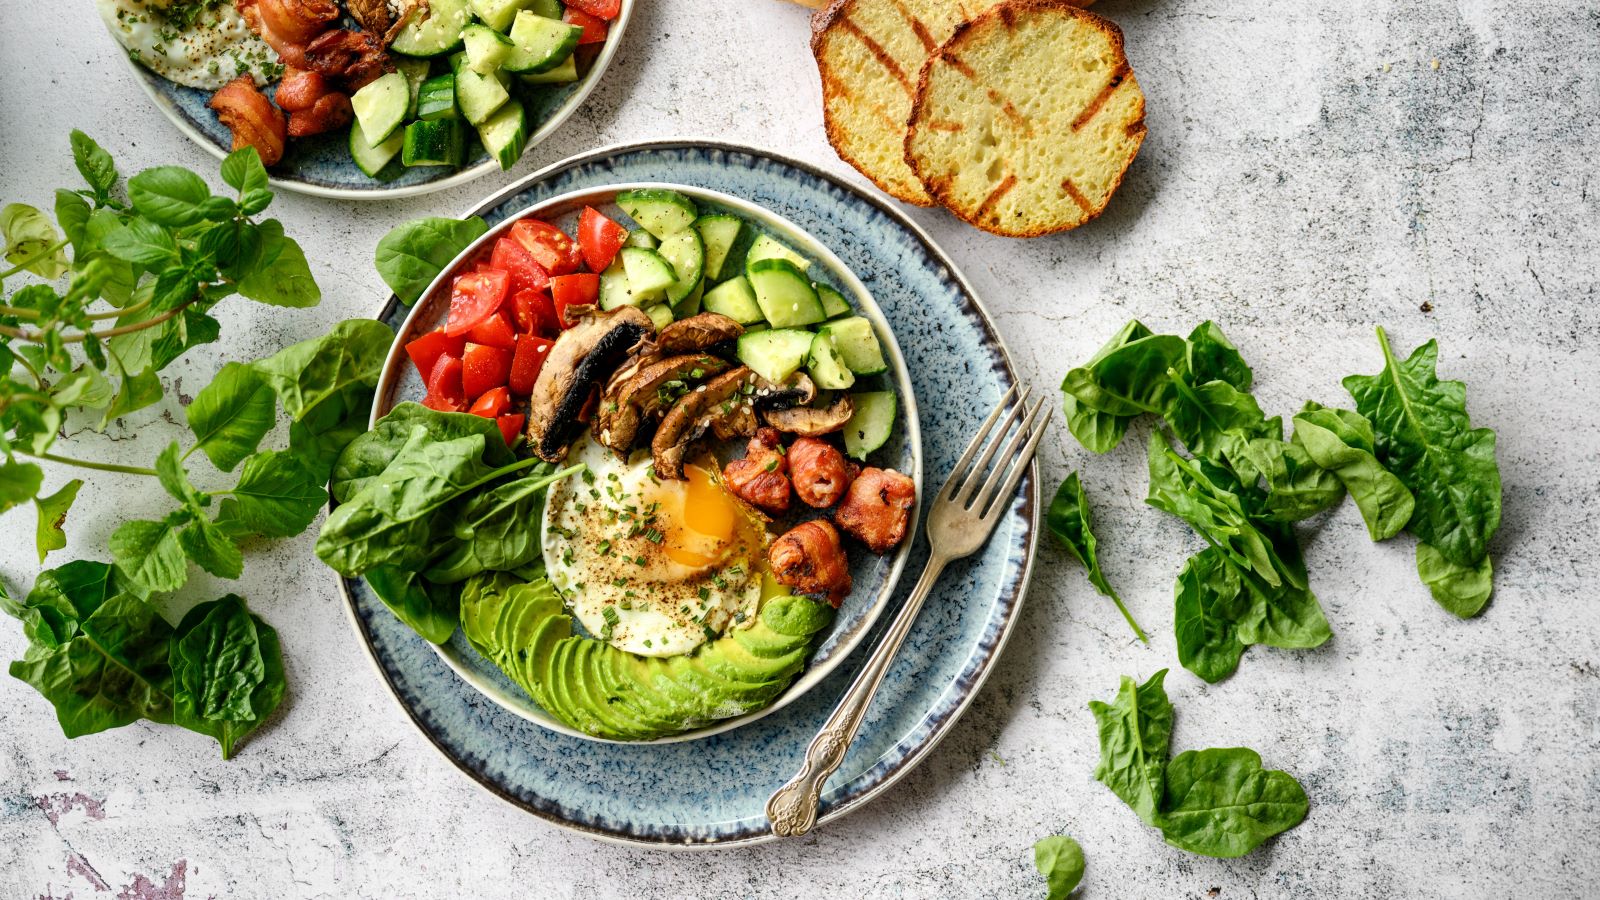 Can the Keto Diet Treat My Epilepsy?